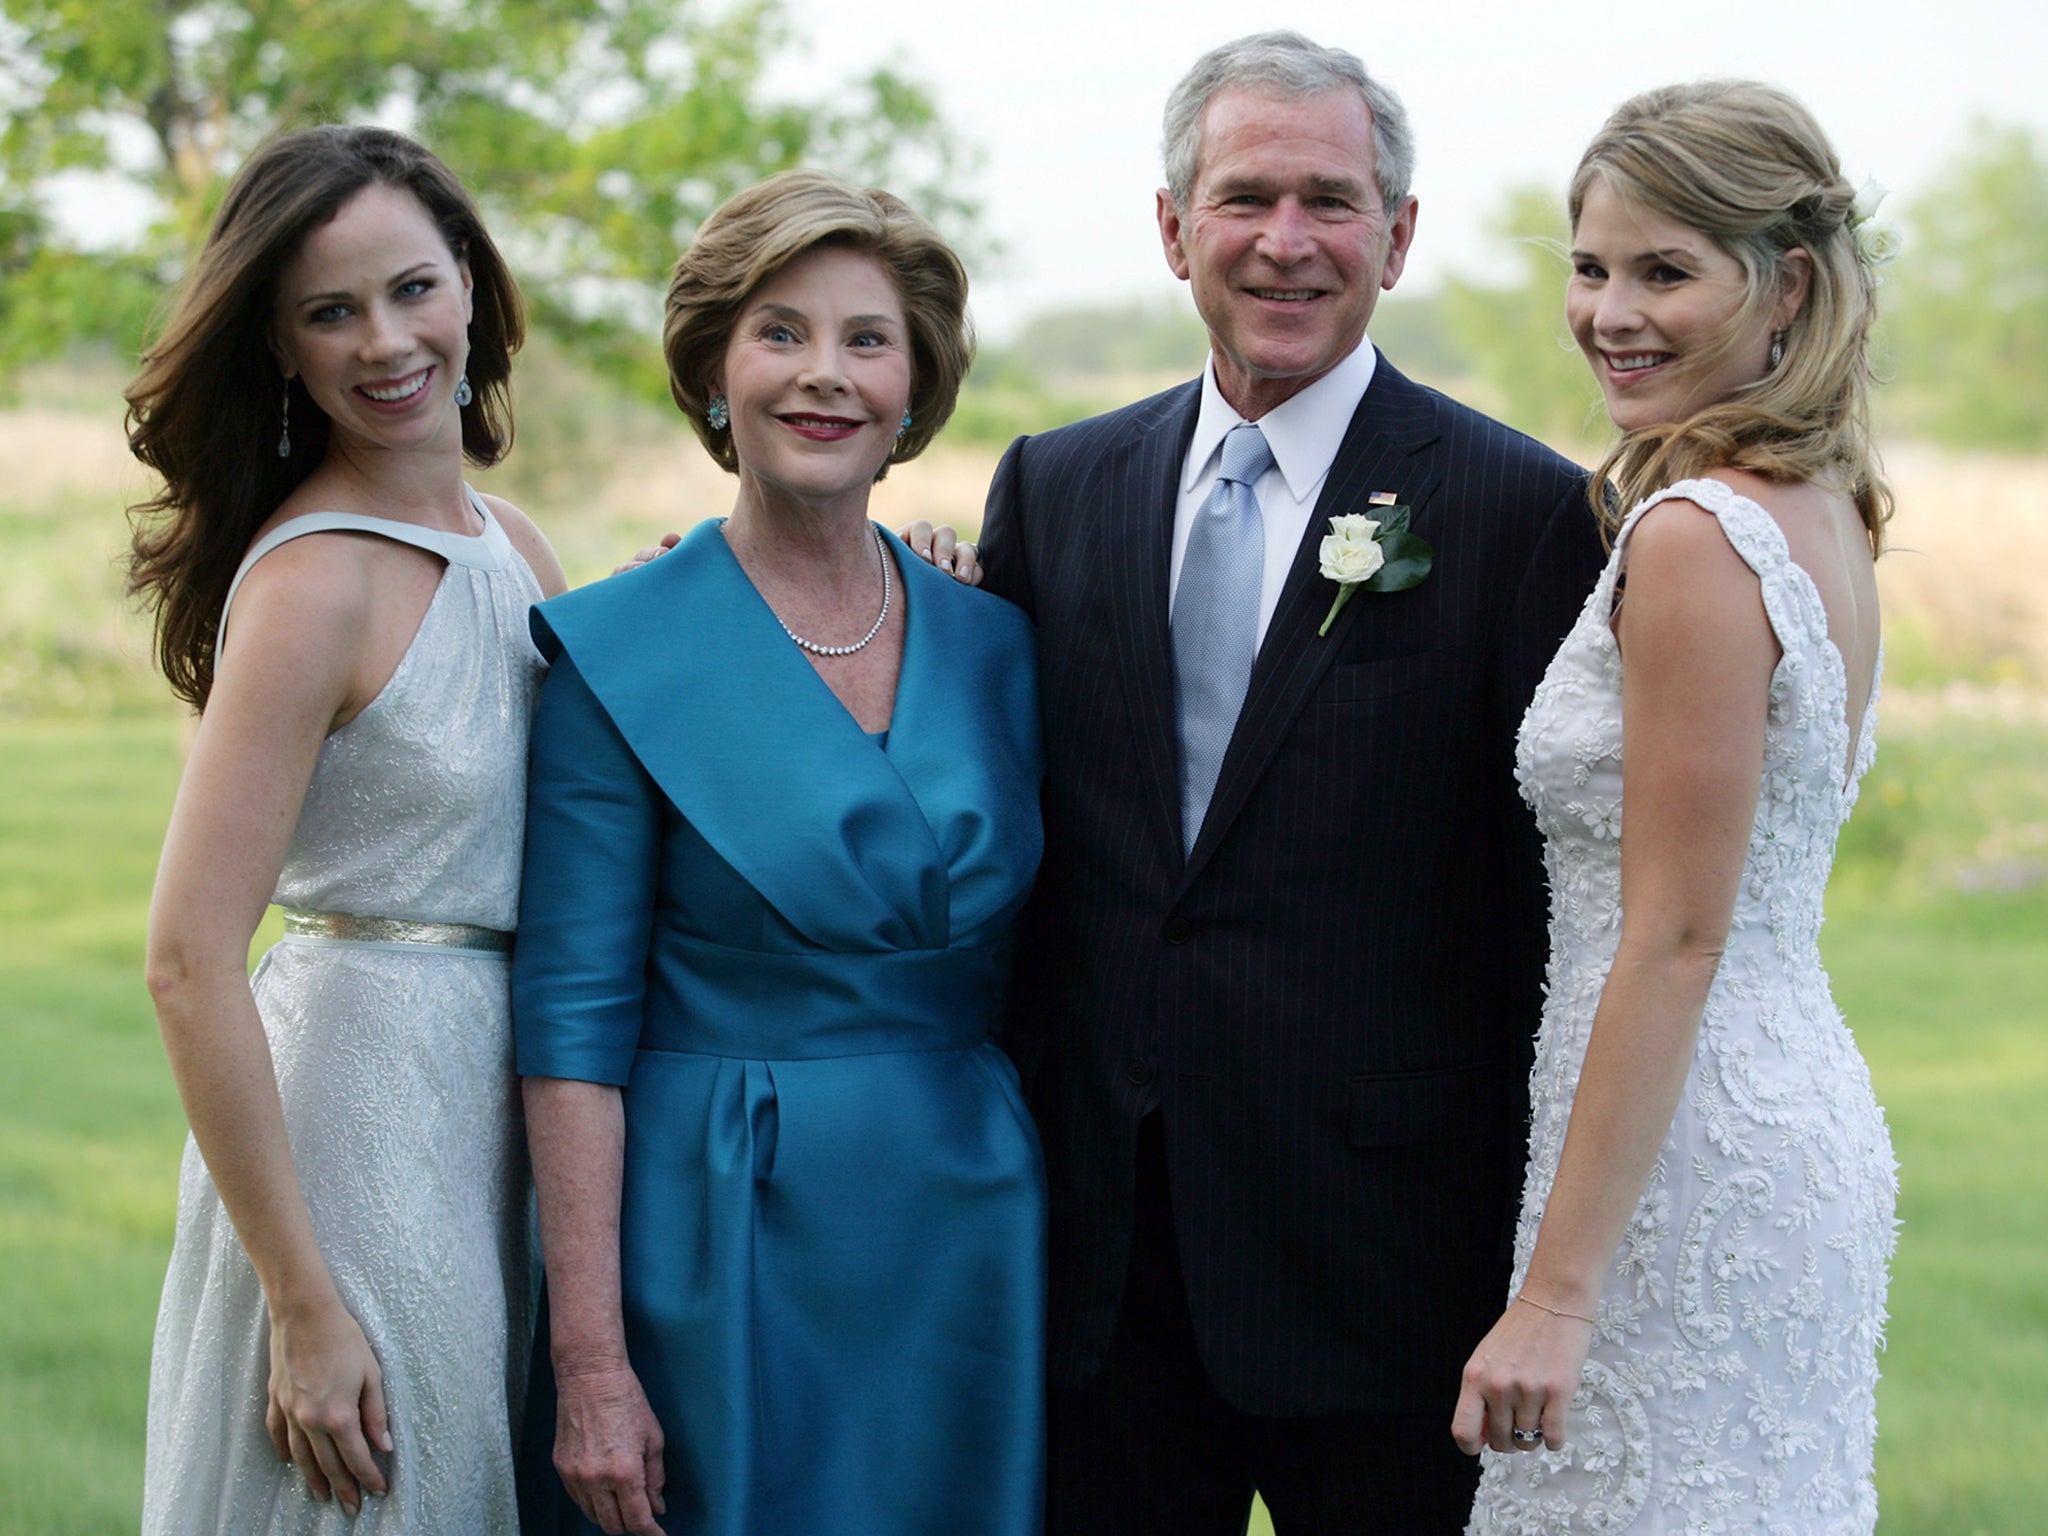 President George W. Bush and his wife Laura Bush pose with twin daughters Barbara (L) and Jenna (R) on Jenna Bush's wedding day